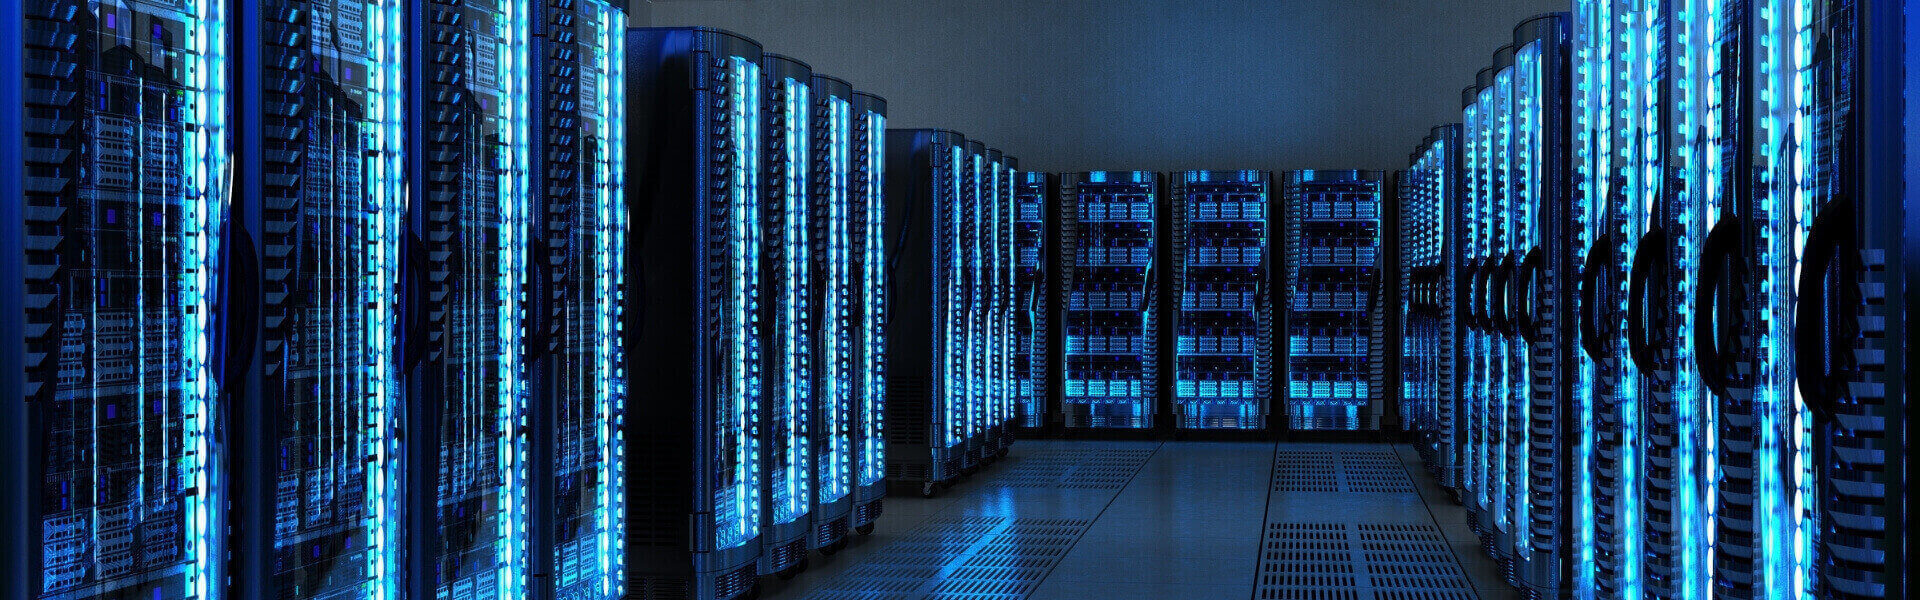 Background image of a data centre